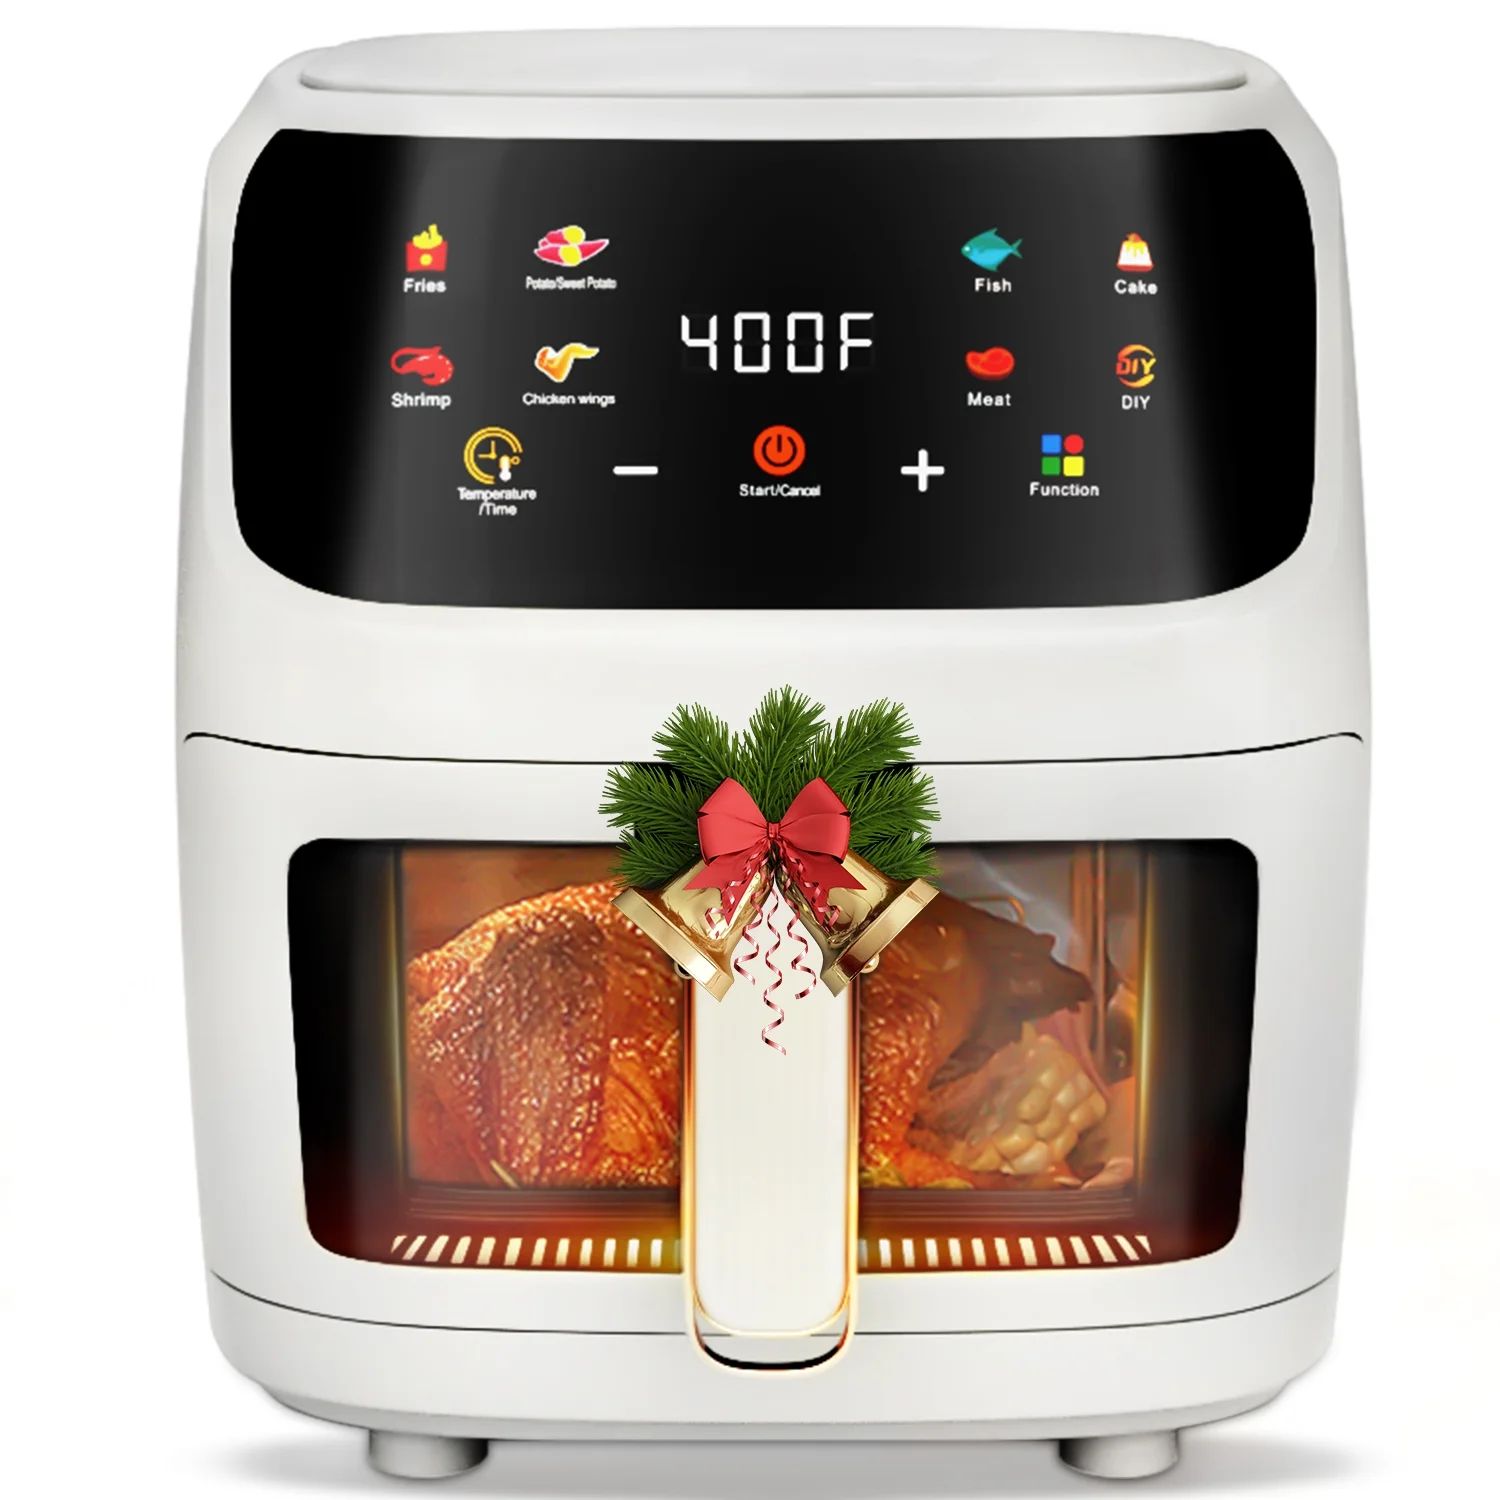 Air Fryer Large 8QT, 8-in-1 Digital Touchscreen, Visible Cooking Window, 1700W, White | Walmart (US)